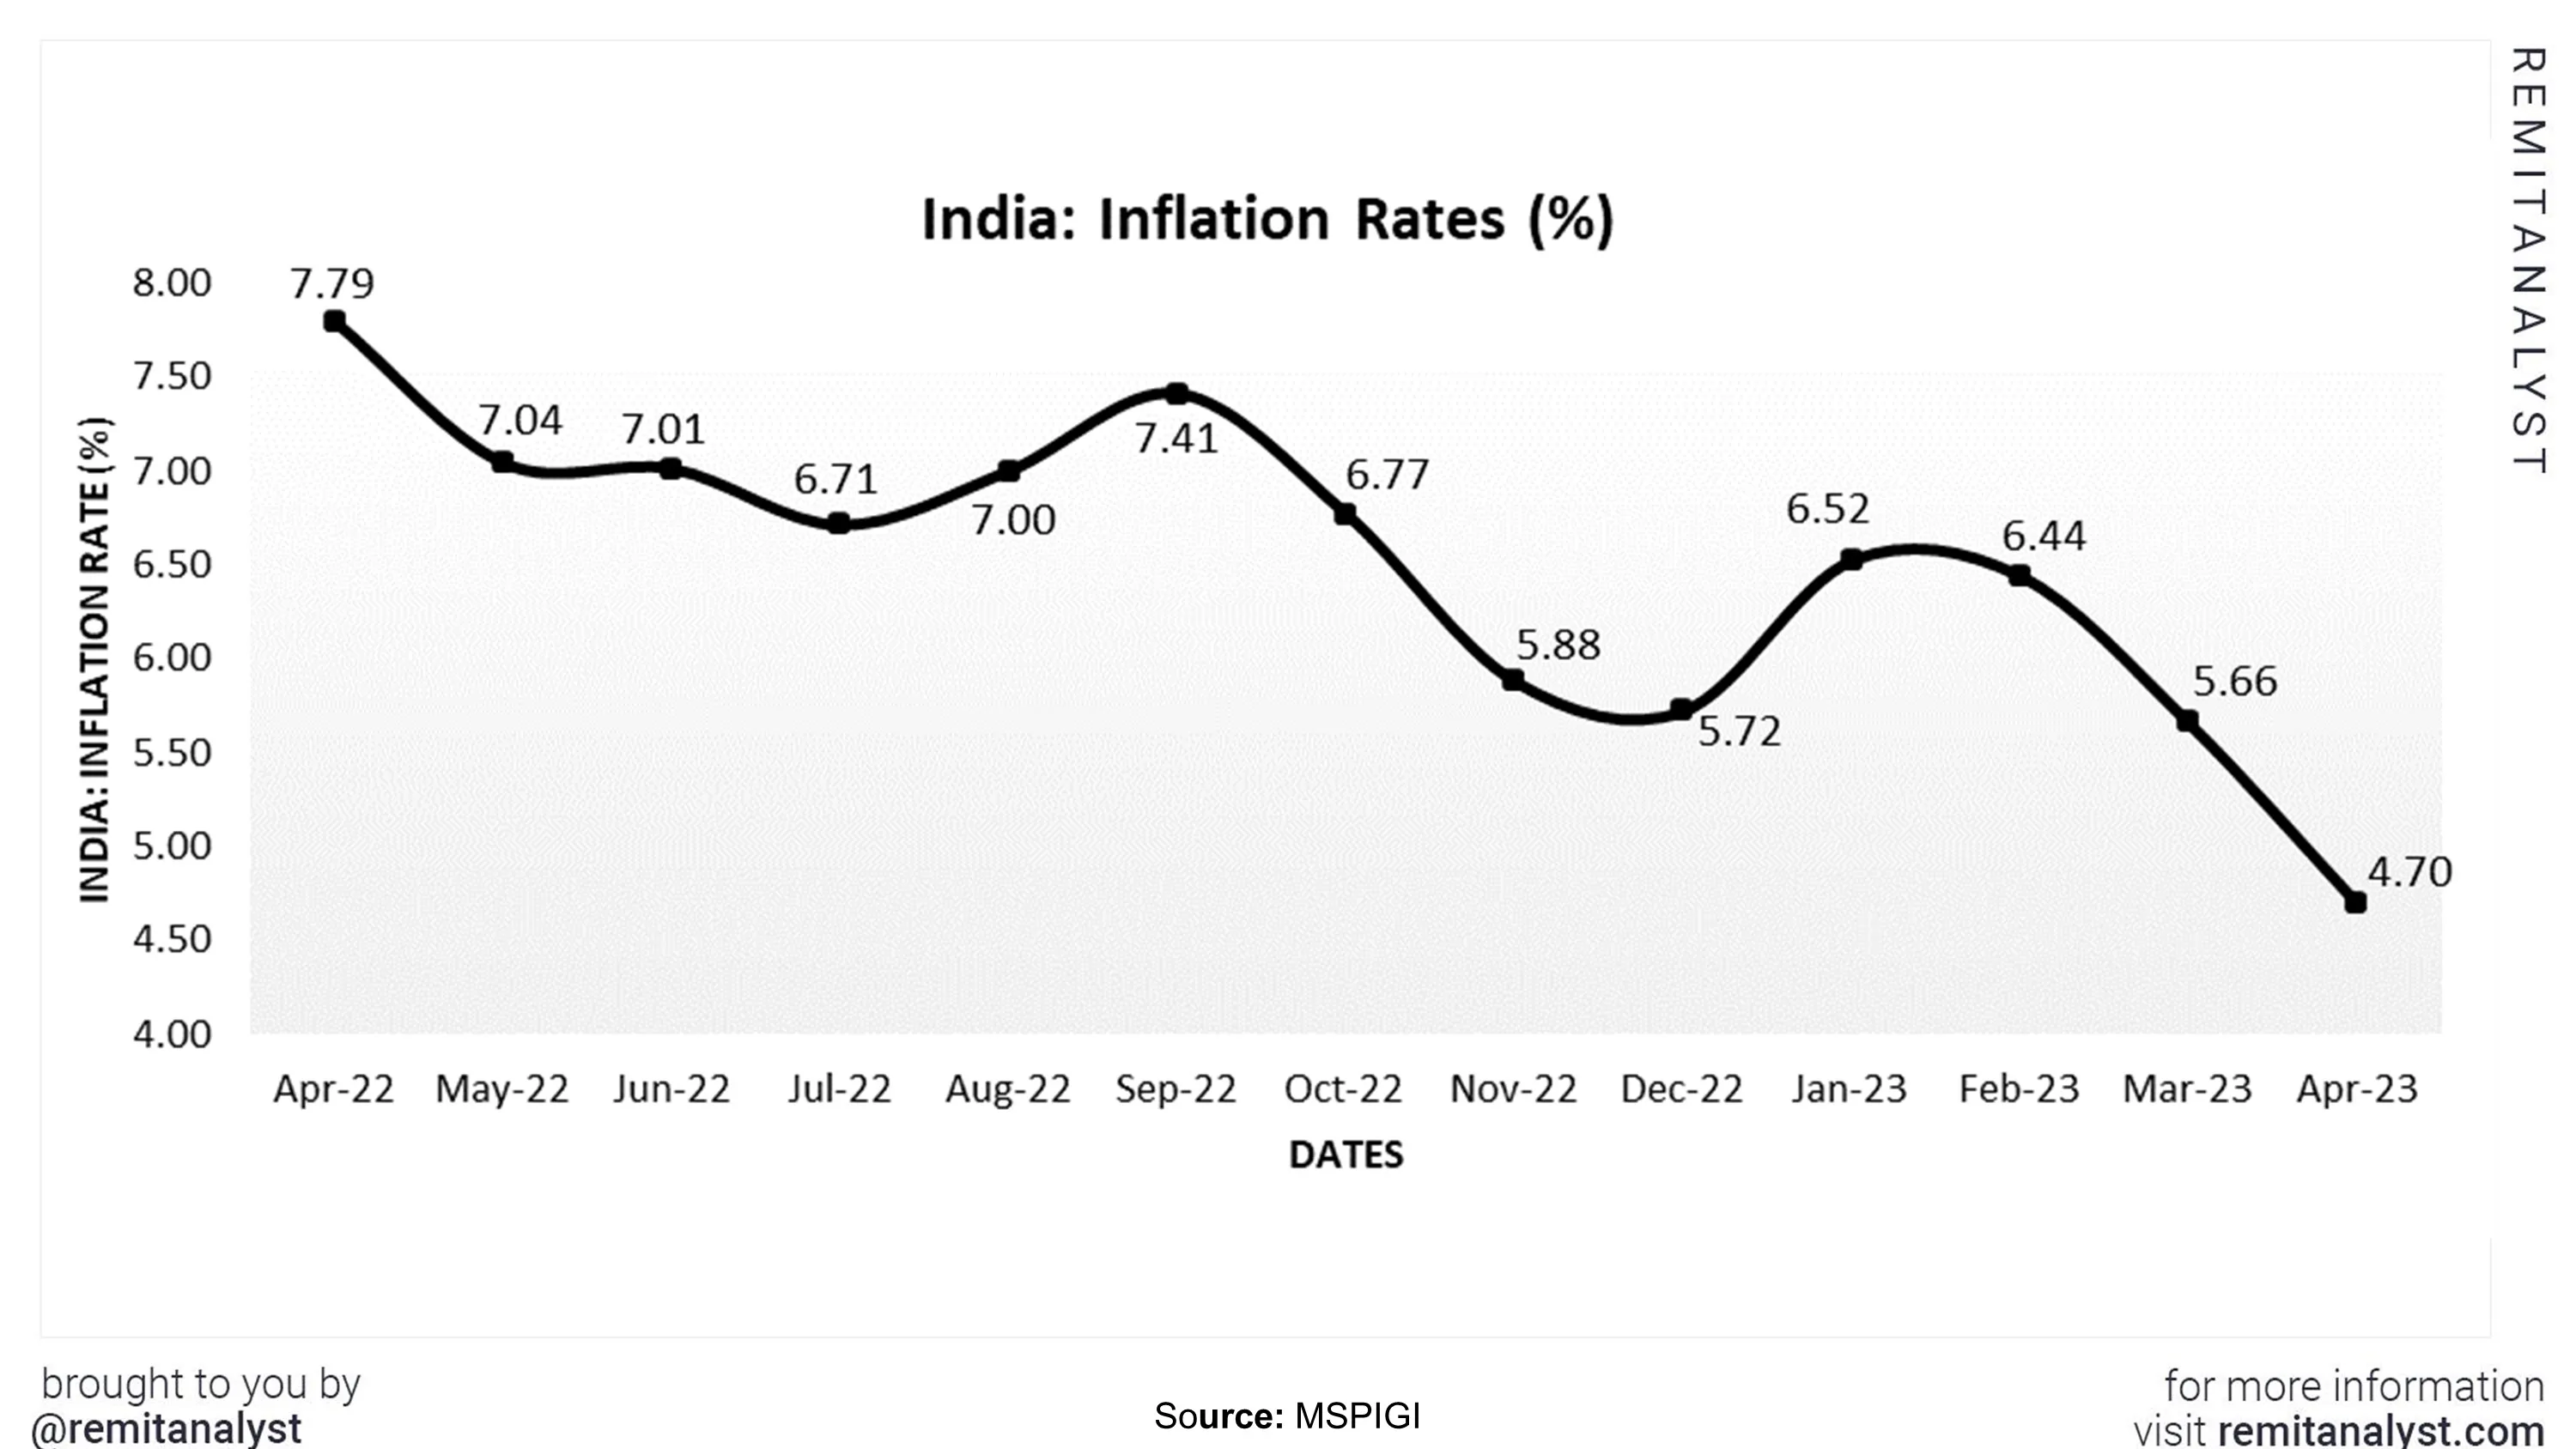 inflation-rates-in-india-from-apr-2022-to-apr-2023